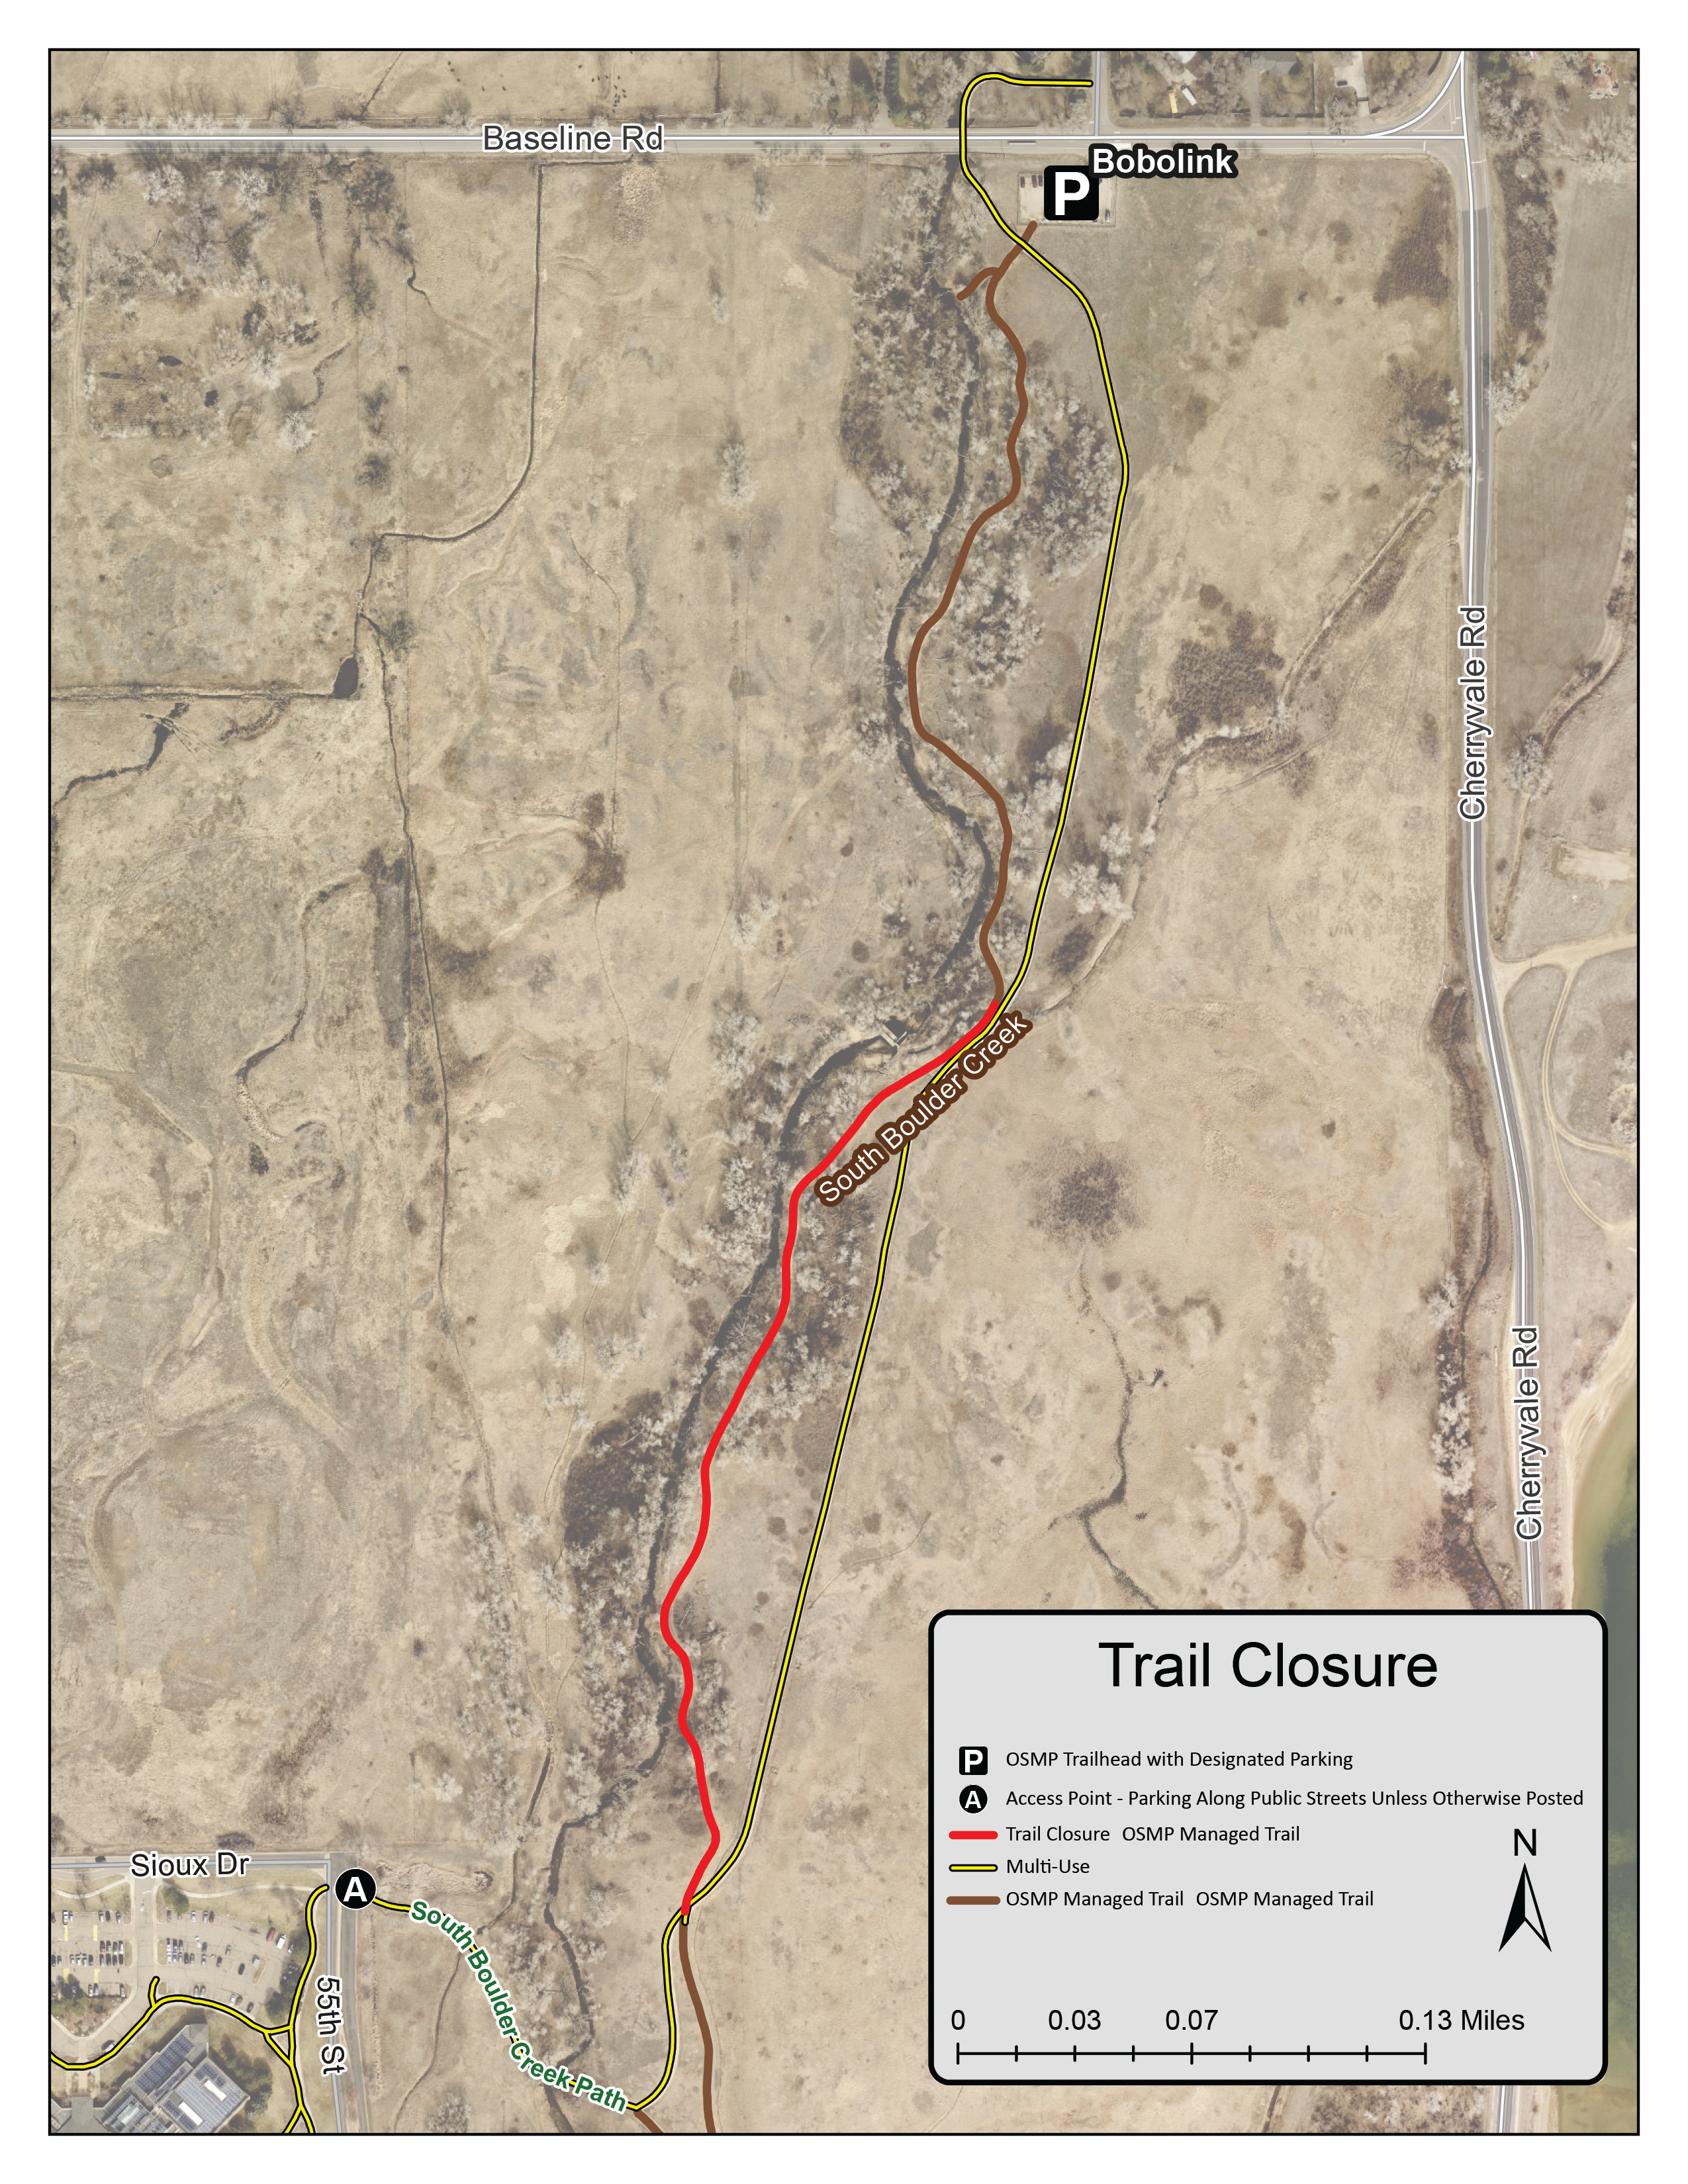 There will a trail closure at the southern most section of the unpaved South Boulder Creek Trail